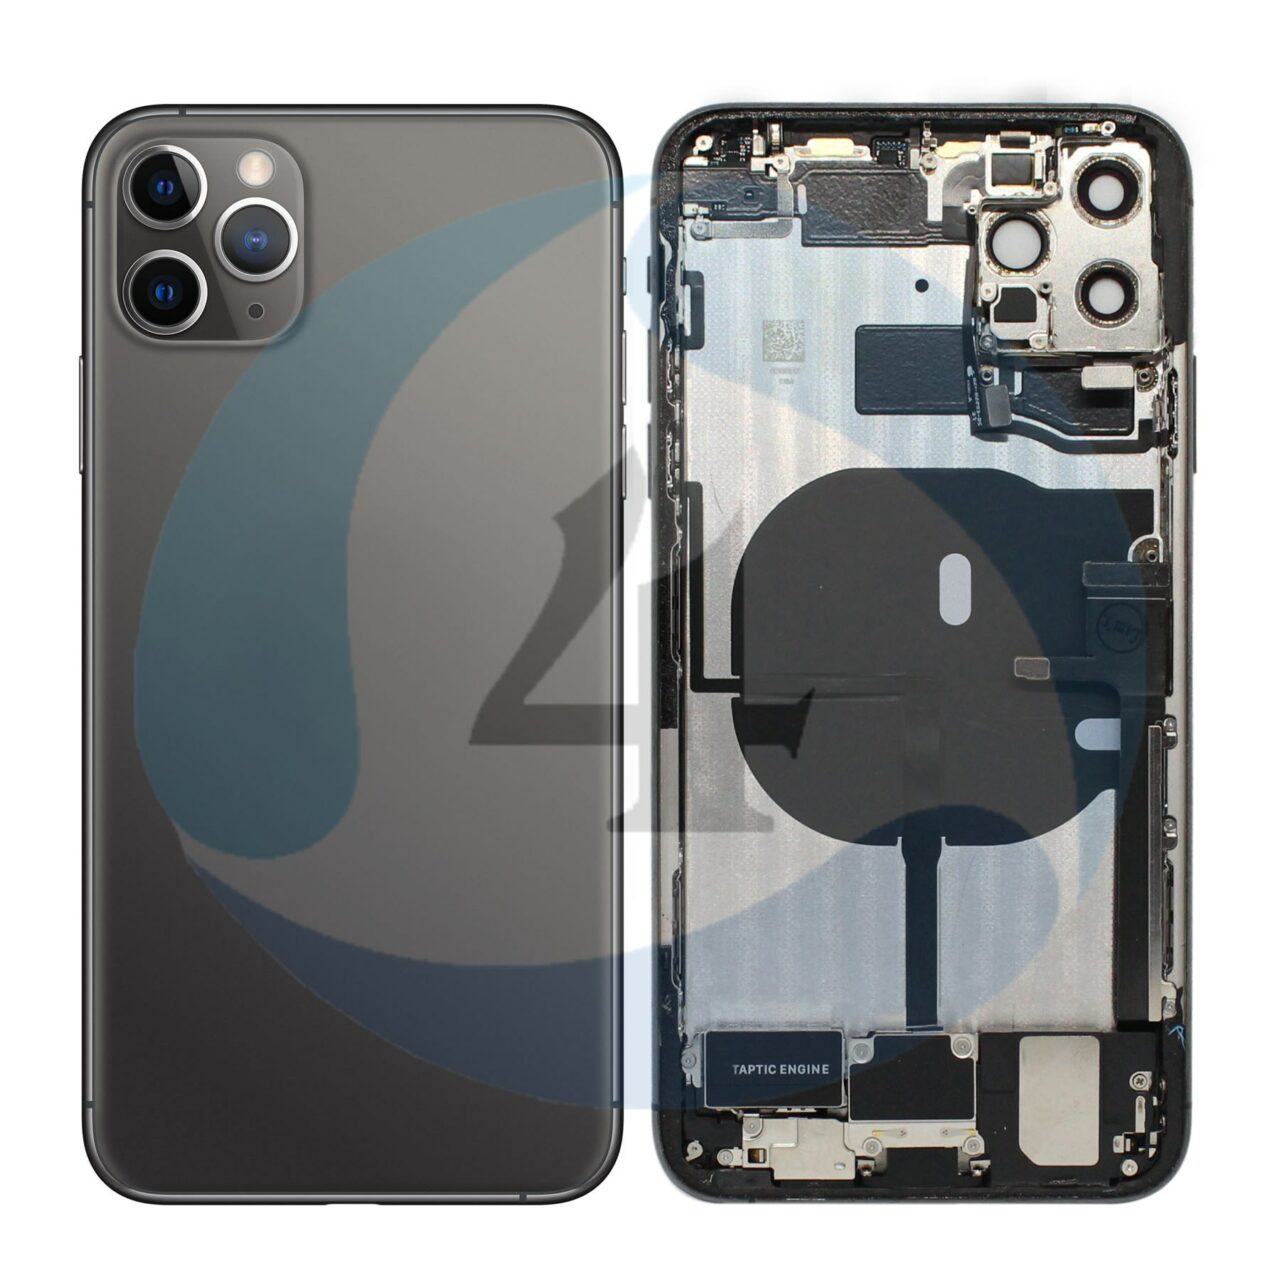 Iphone 11 Pro backcover housing Black